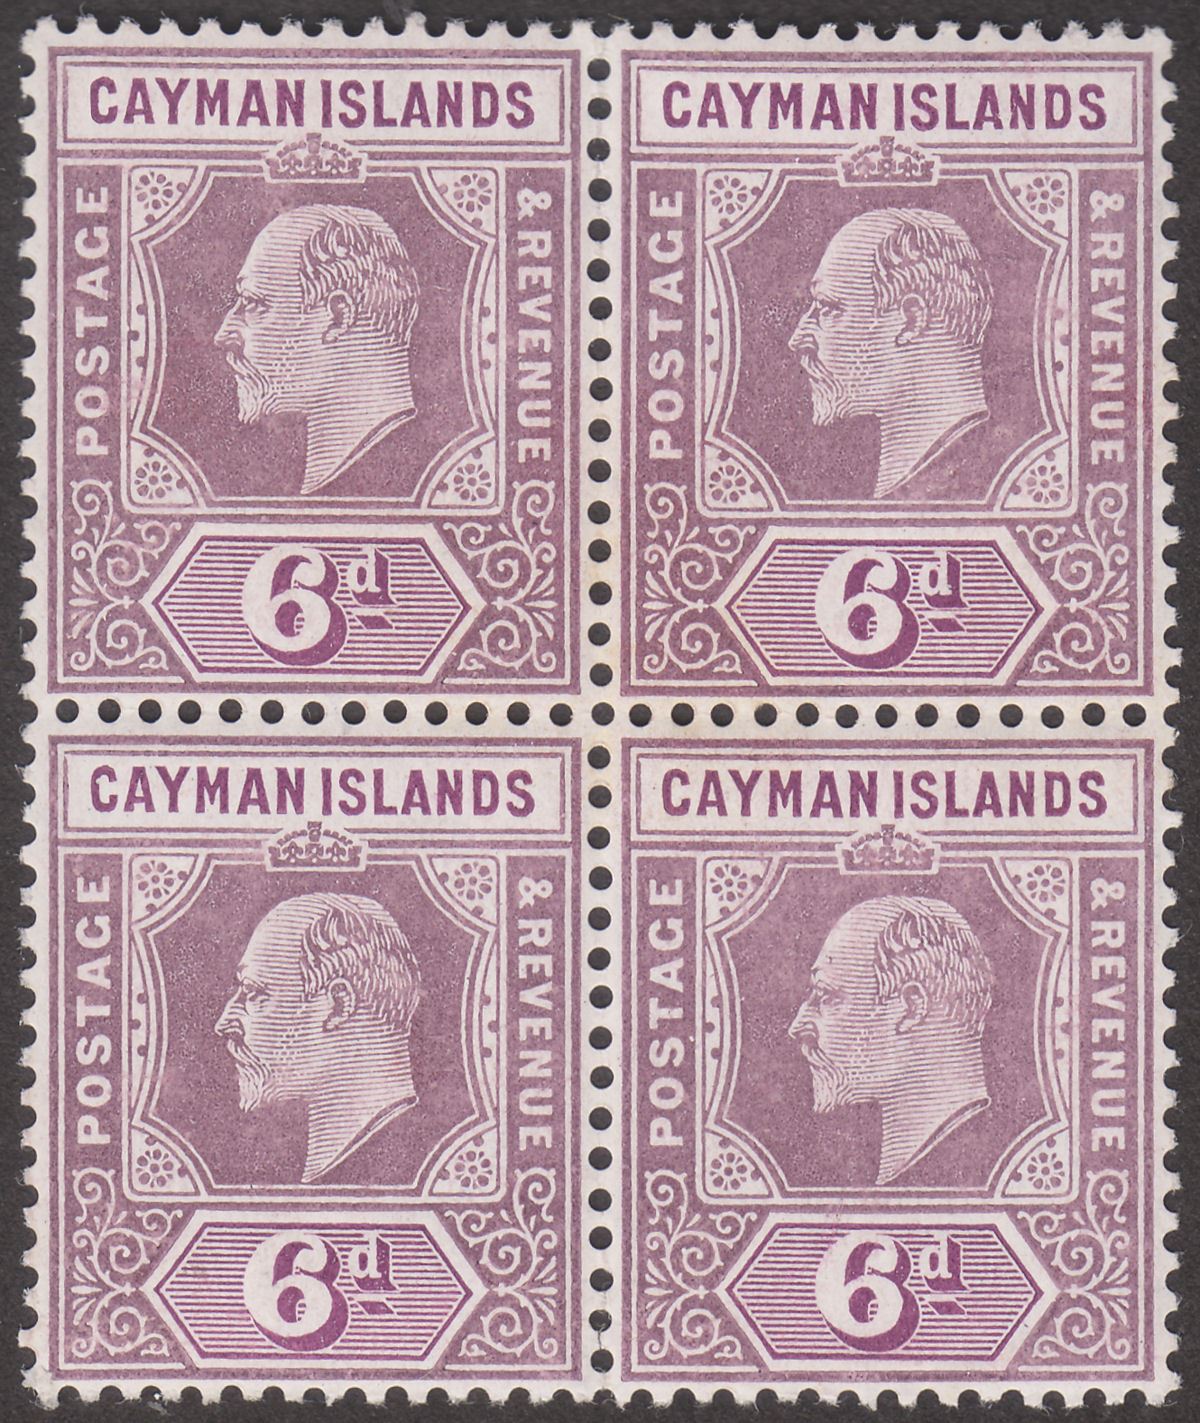 Cayman Islands 1908 KEVII 6d Dull Purple and Violet Purple Block of 4 Mint SG30